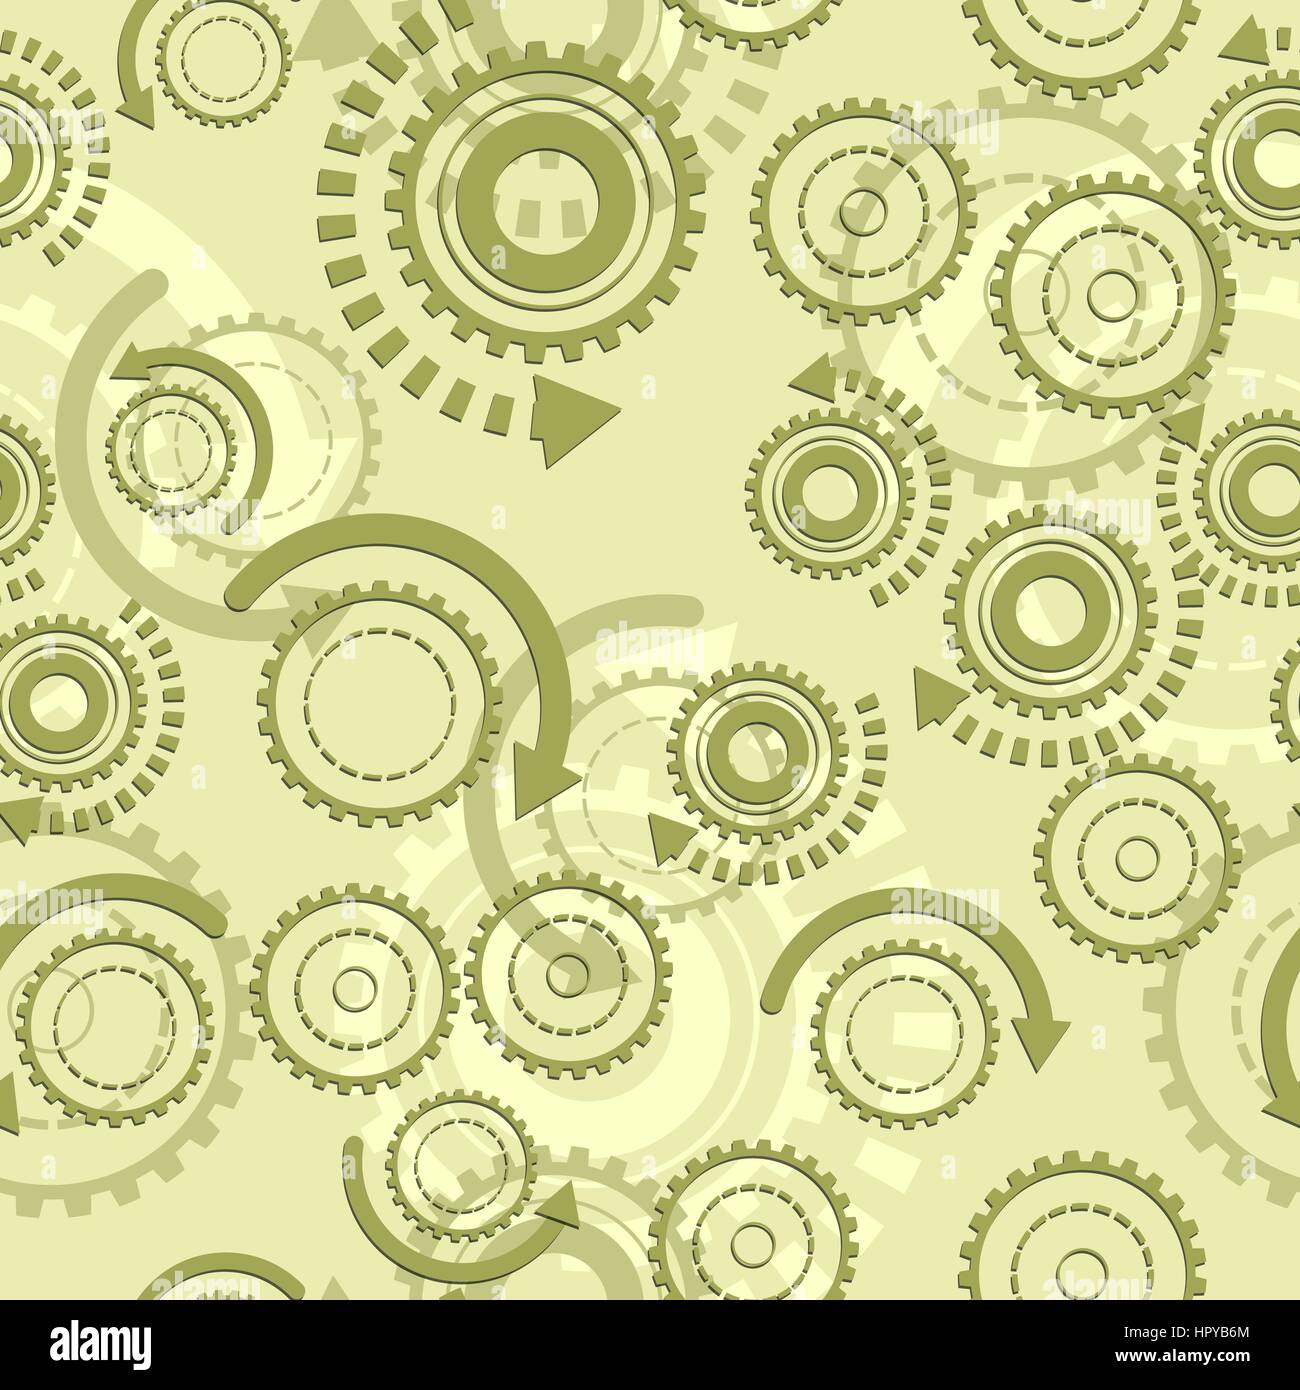 Technical gears seamless pattern. Vector illustration. Engineering mechanic transmission background. Stock Vector